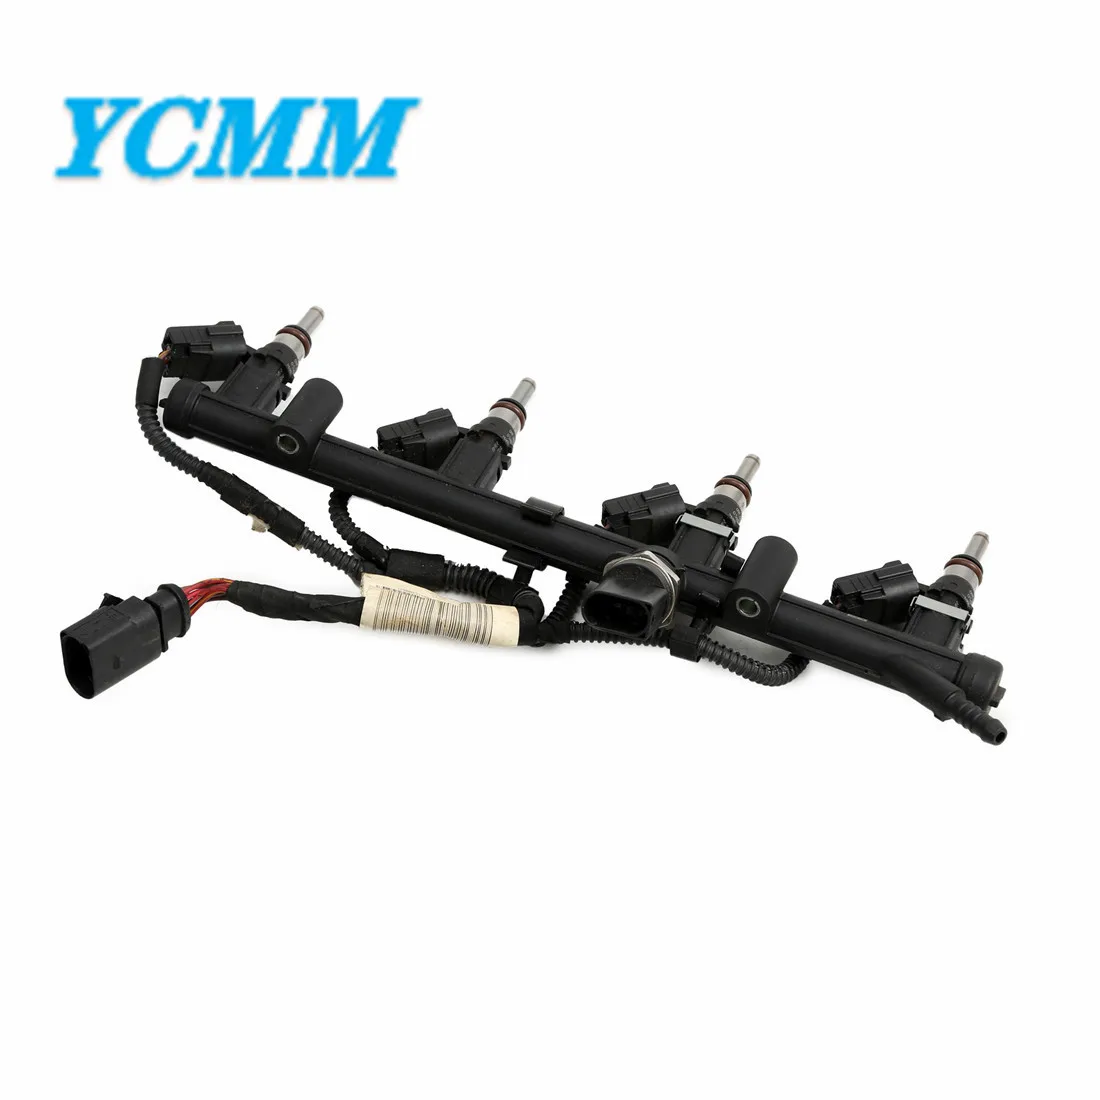 

Intake Manifold Fuel Injection Rail Kit EA888 MK3 1.8/2.0T For VW Audi Seat Skoda Injection Valve Harness Assembly W/Nozzle